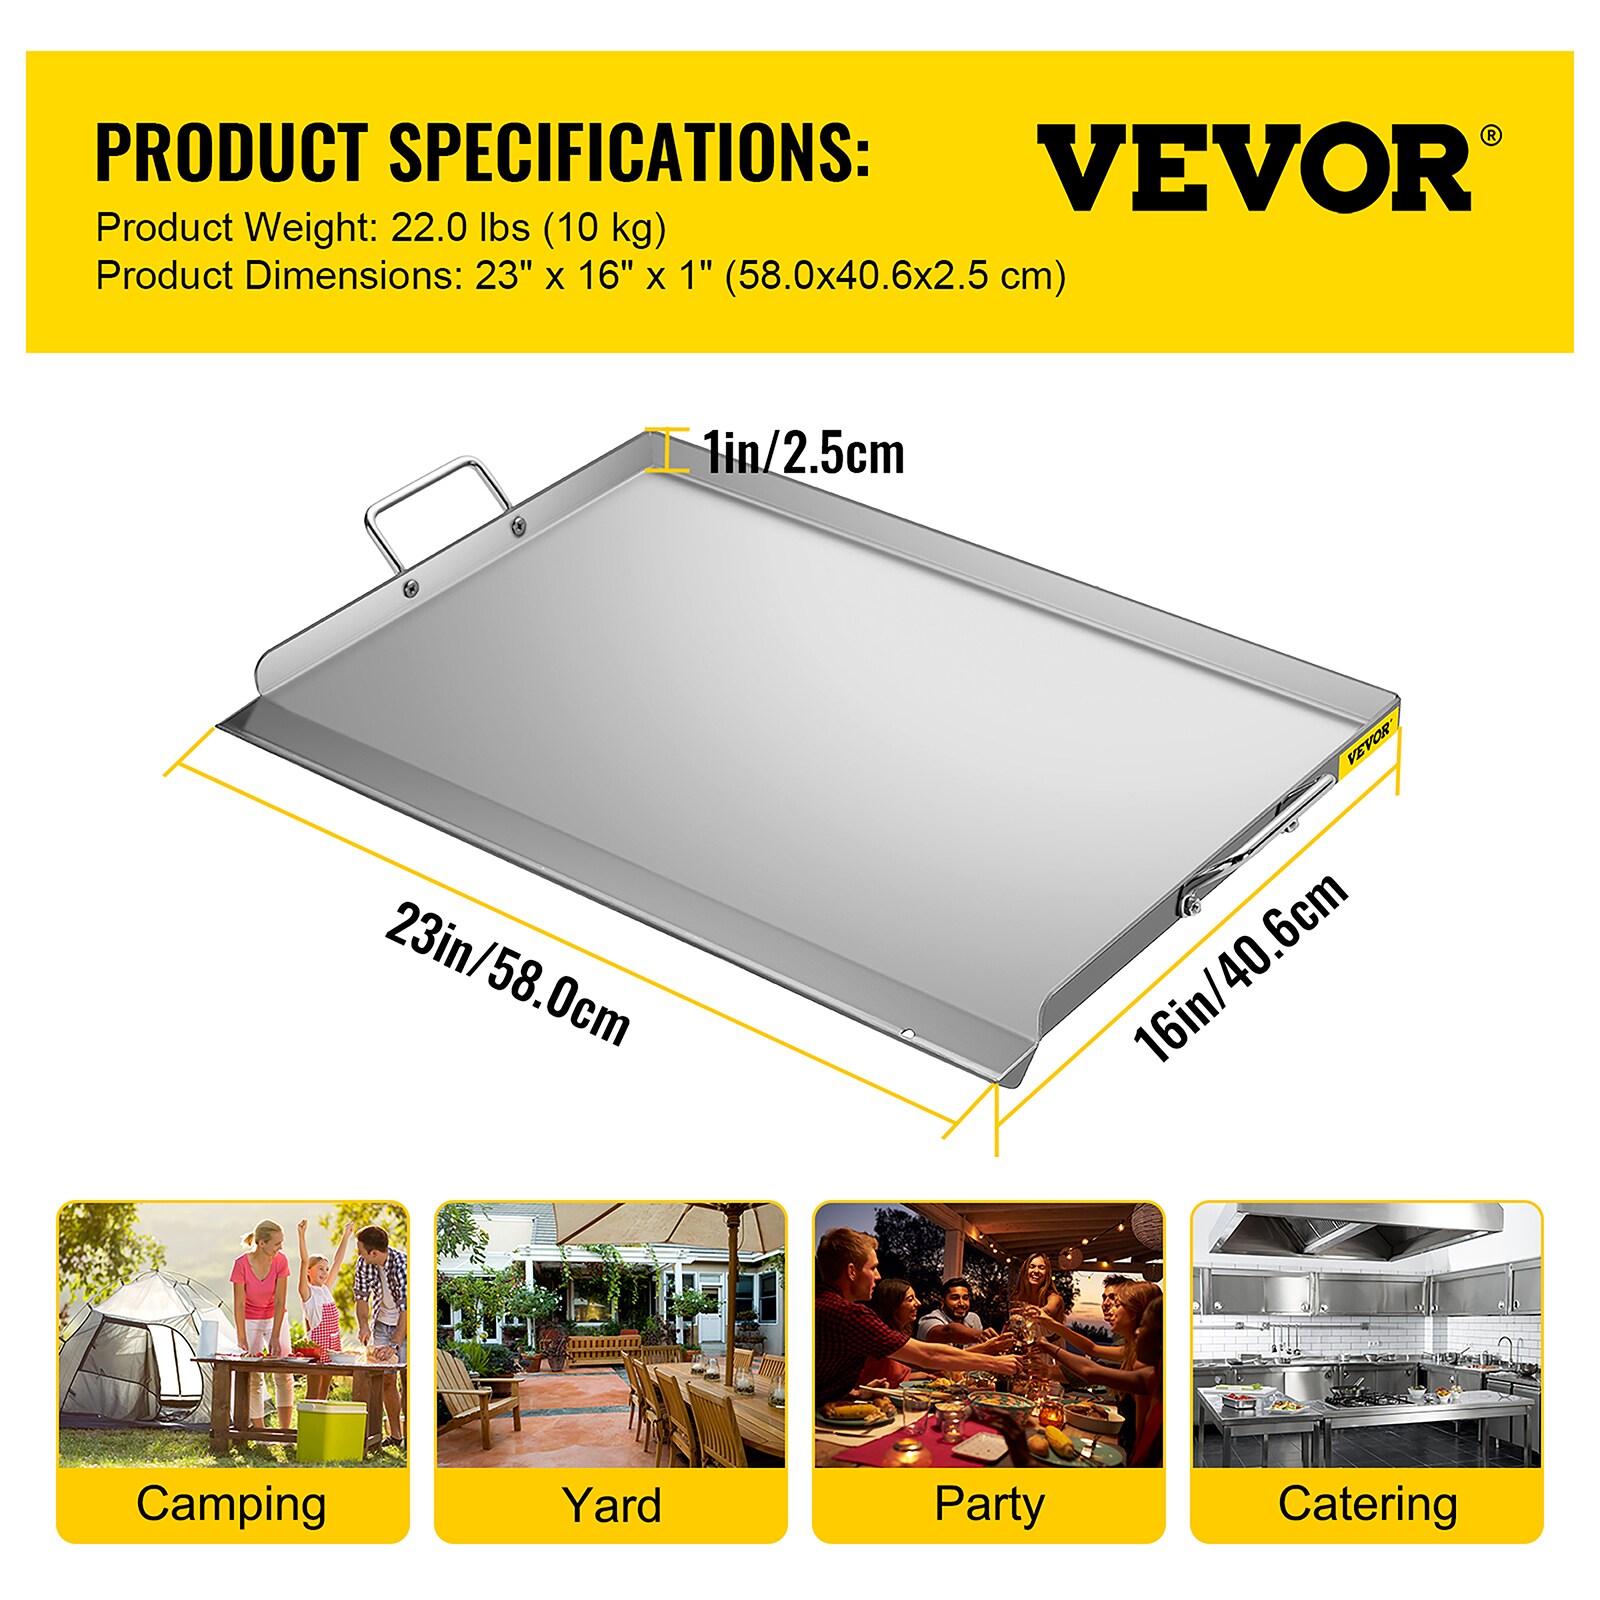 VEVOR Stainless Steel Griddle 23.5 in. x 16 in. Pre-Seasoned Stove